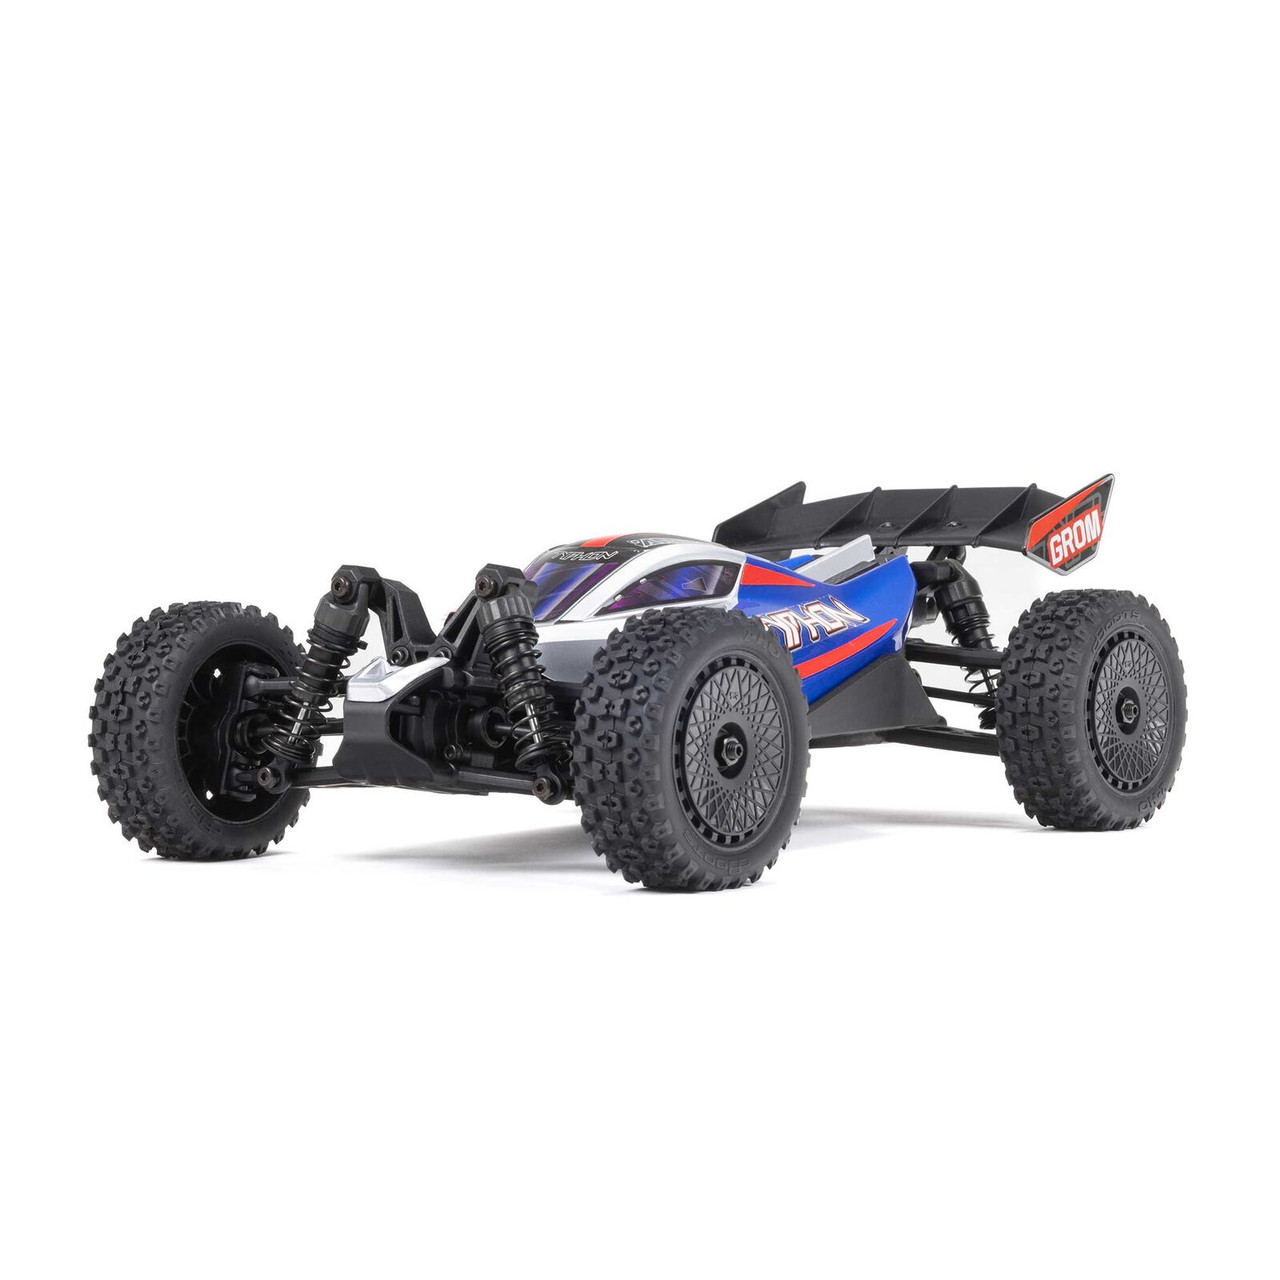 Arrma 1/18 TYPHON GROM MEGA 380 Brushed 4X4 Buggy RTR with Battery & Charger, Blue/Silver